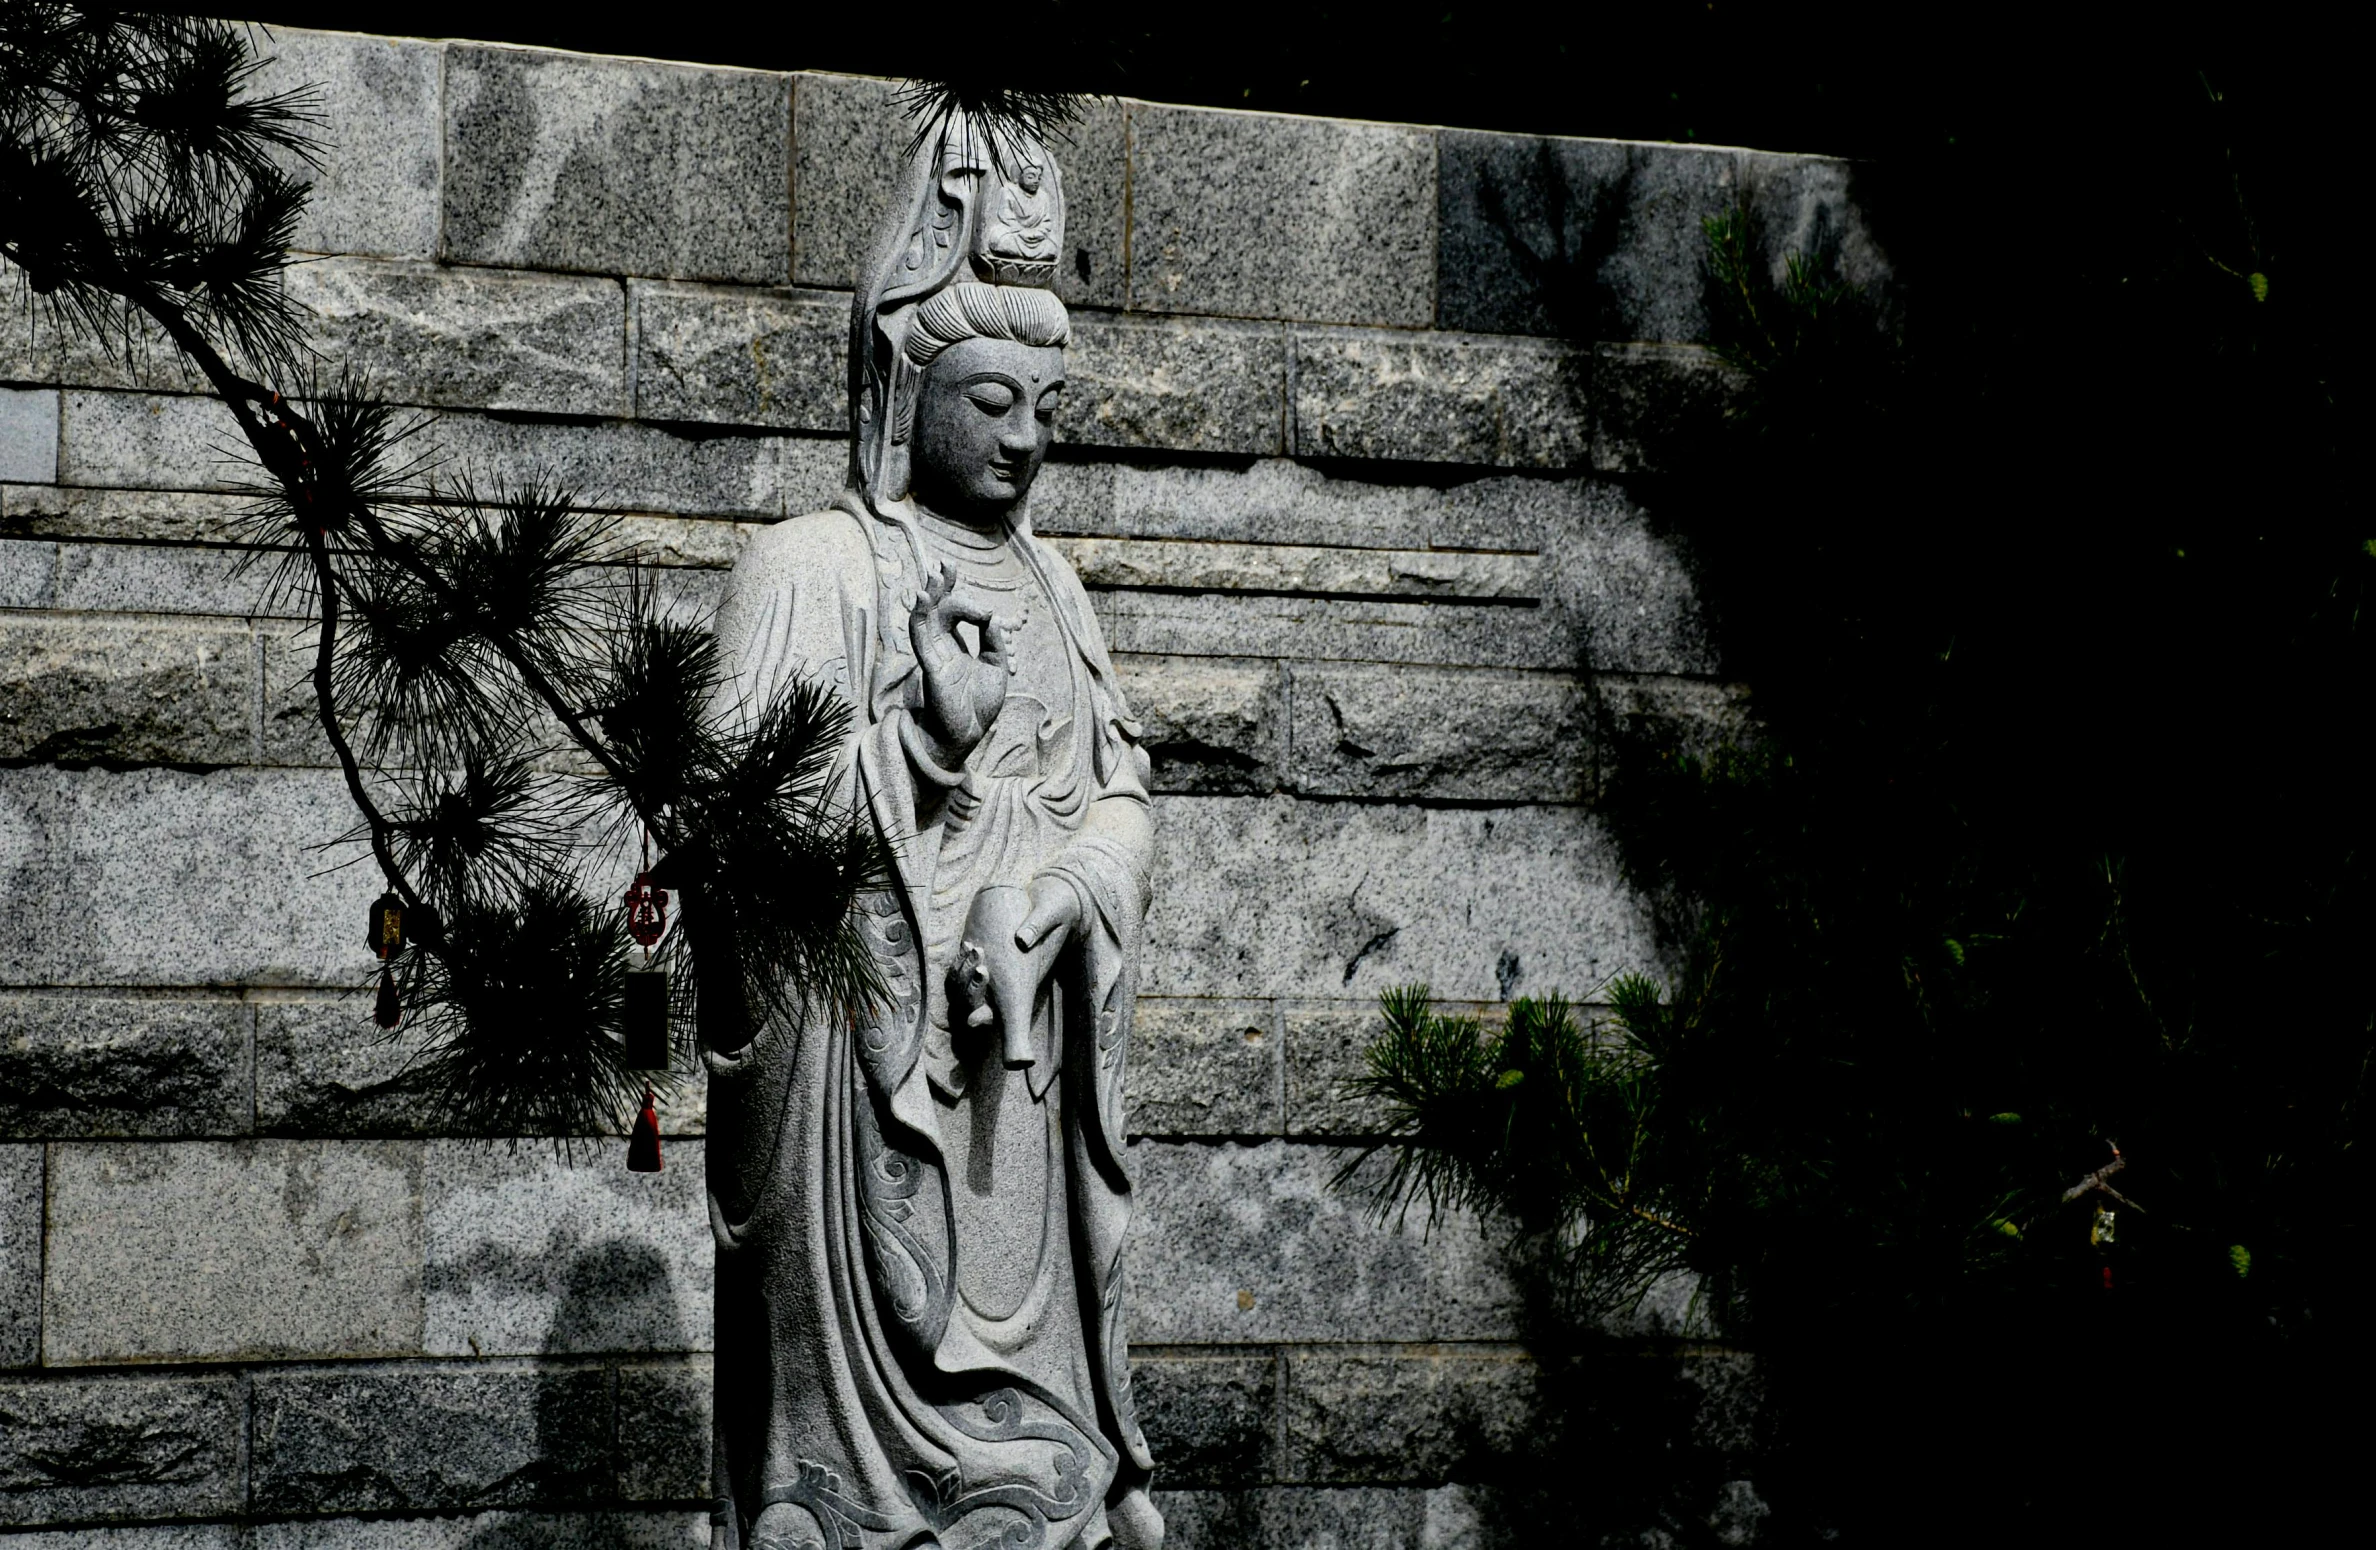 a statue of buddha is shown in front of a brick wall